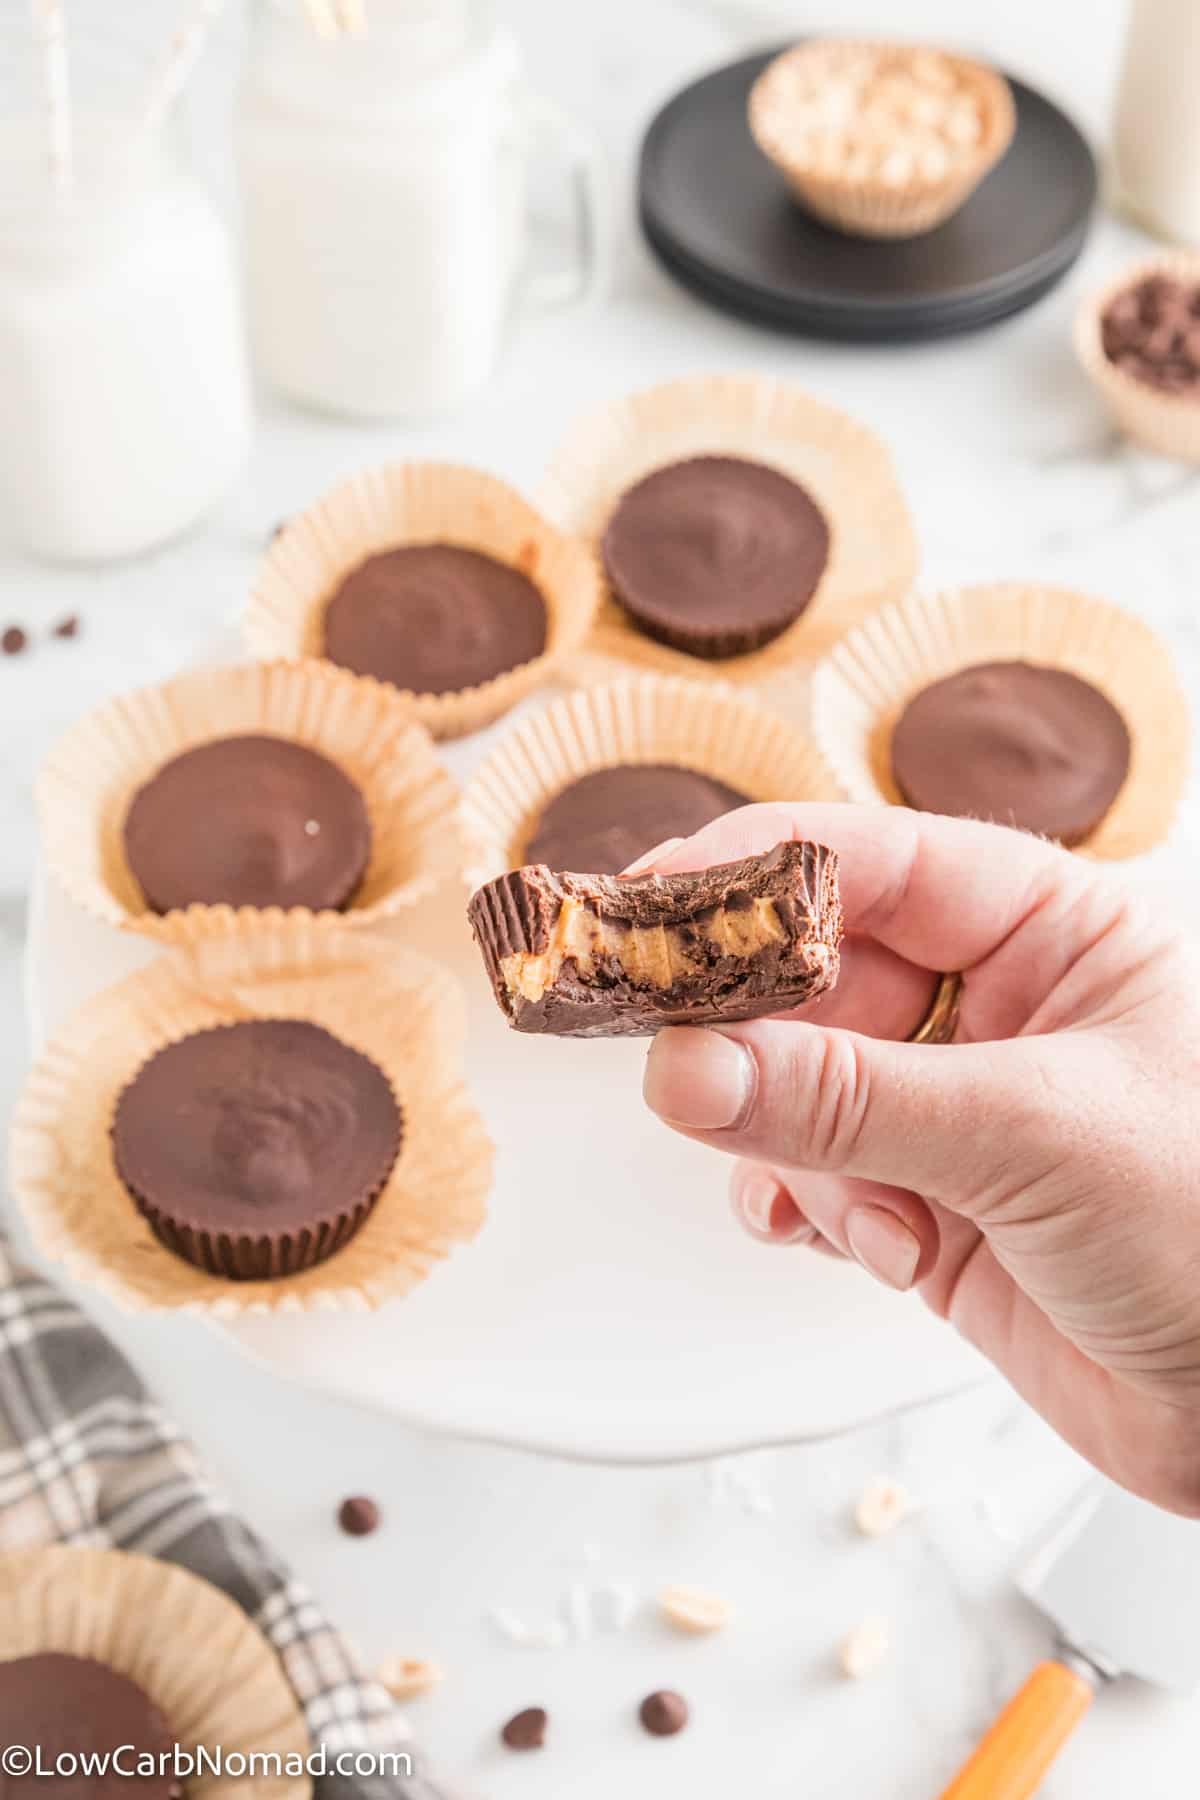 Keto Chocolate Peanut Butter Cups with a bite taken out of it